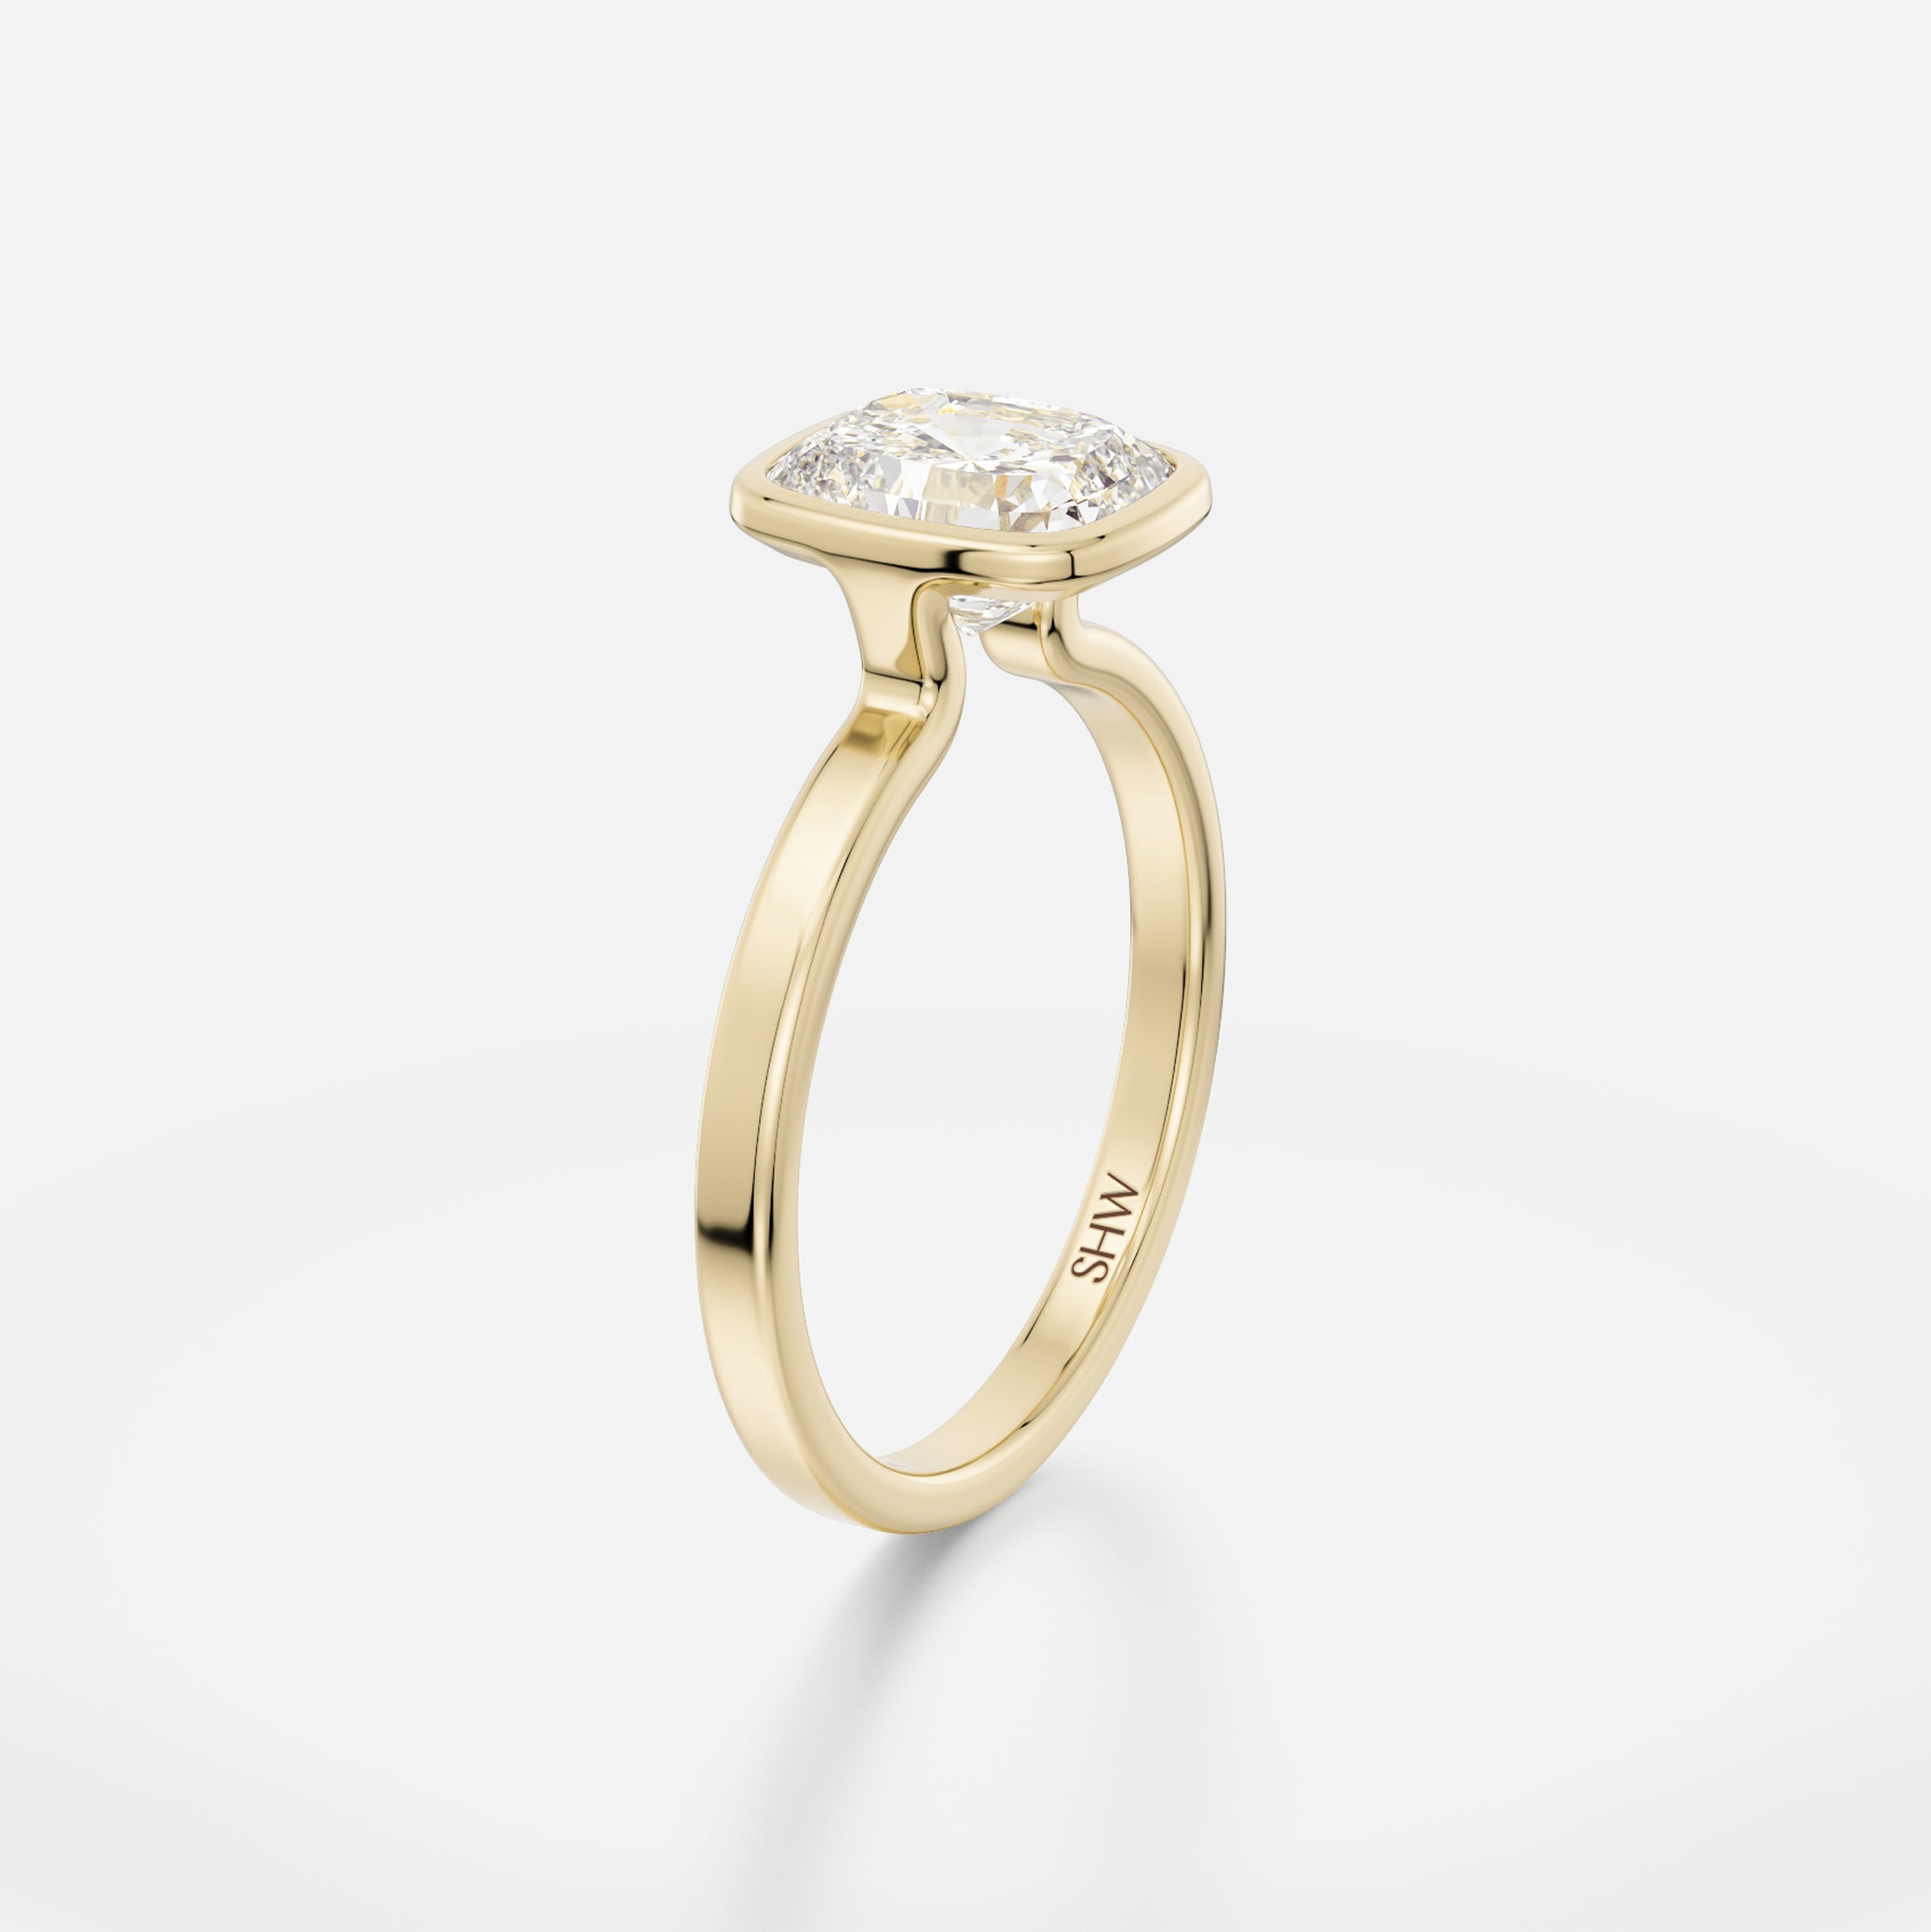 Mana with flat band with Cushion Minimalist Engagement Ring Setting handcrafted by SHW Fine Jewelry New York City